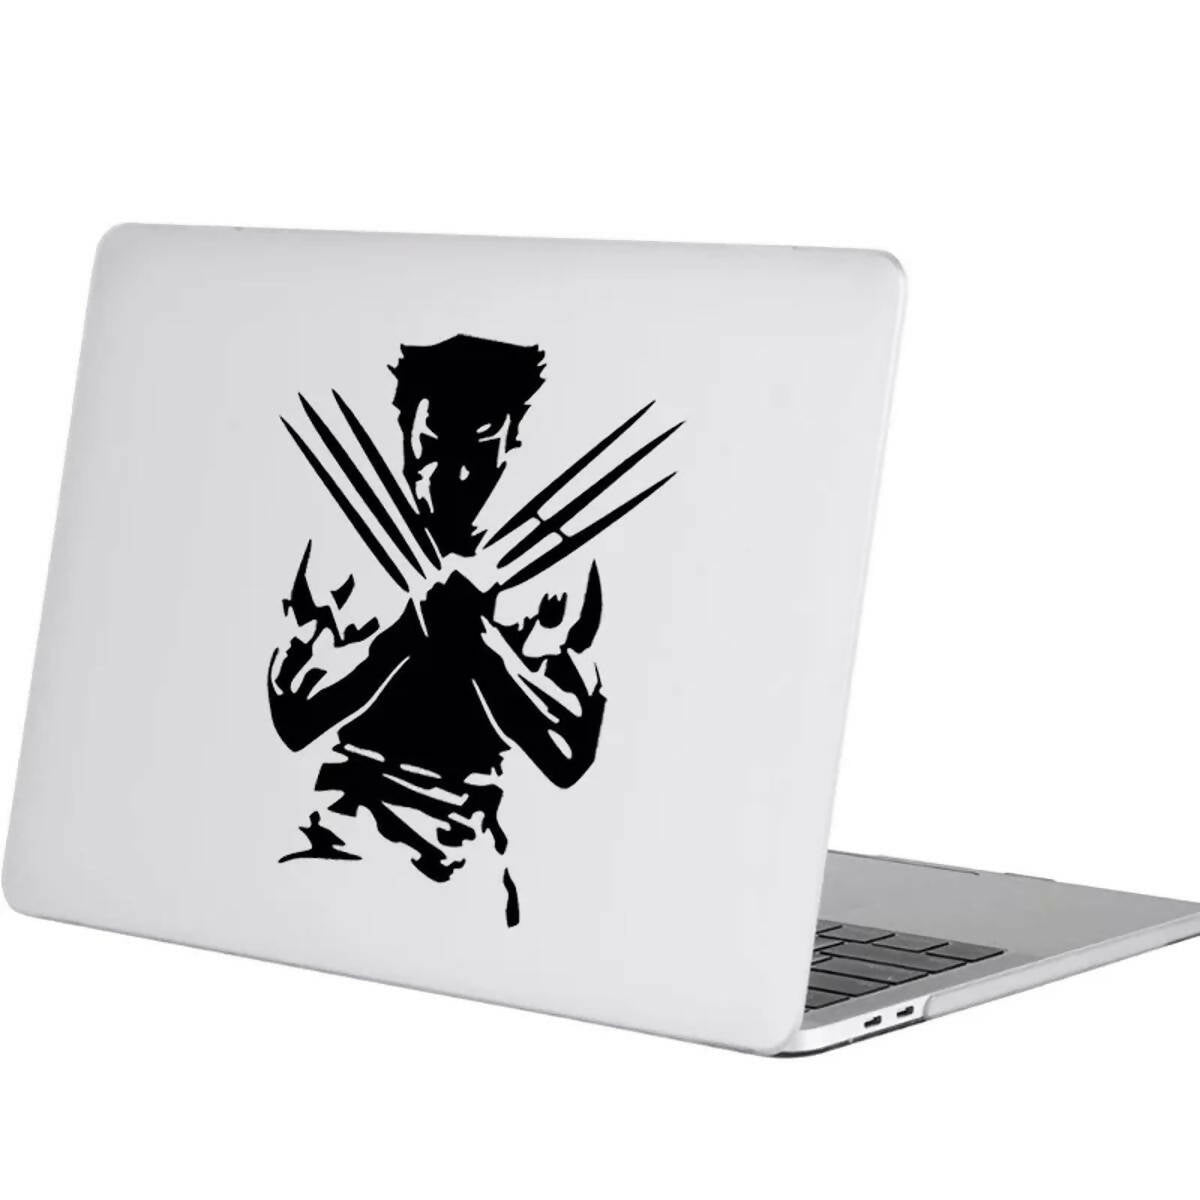 Marvel Comics X-Men Logan Wolverine, Black, 7 Inches, Die Cut Vinyl Decal, For Windows, Cars, Trucks, Toolbox, Laptops- virtually Any Hard Smooth Surface